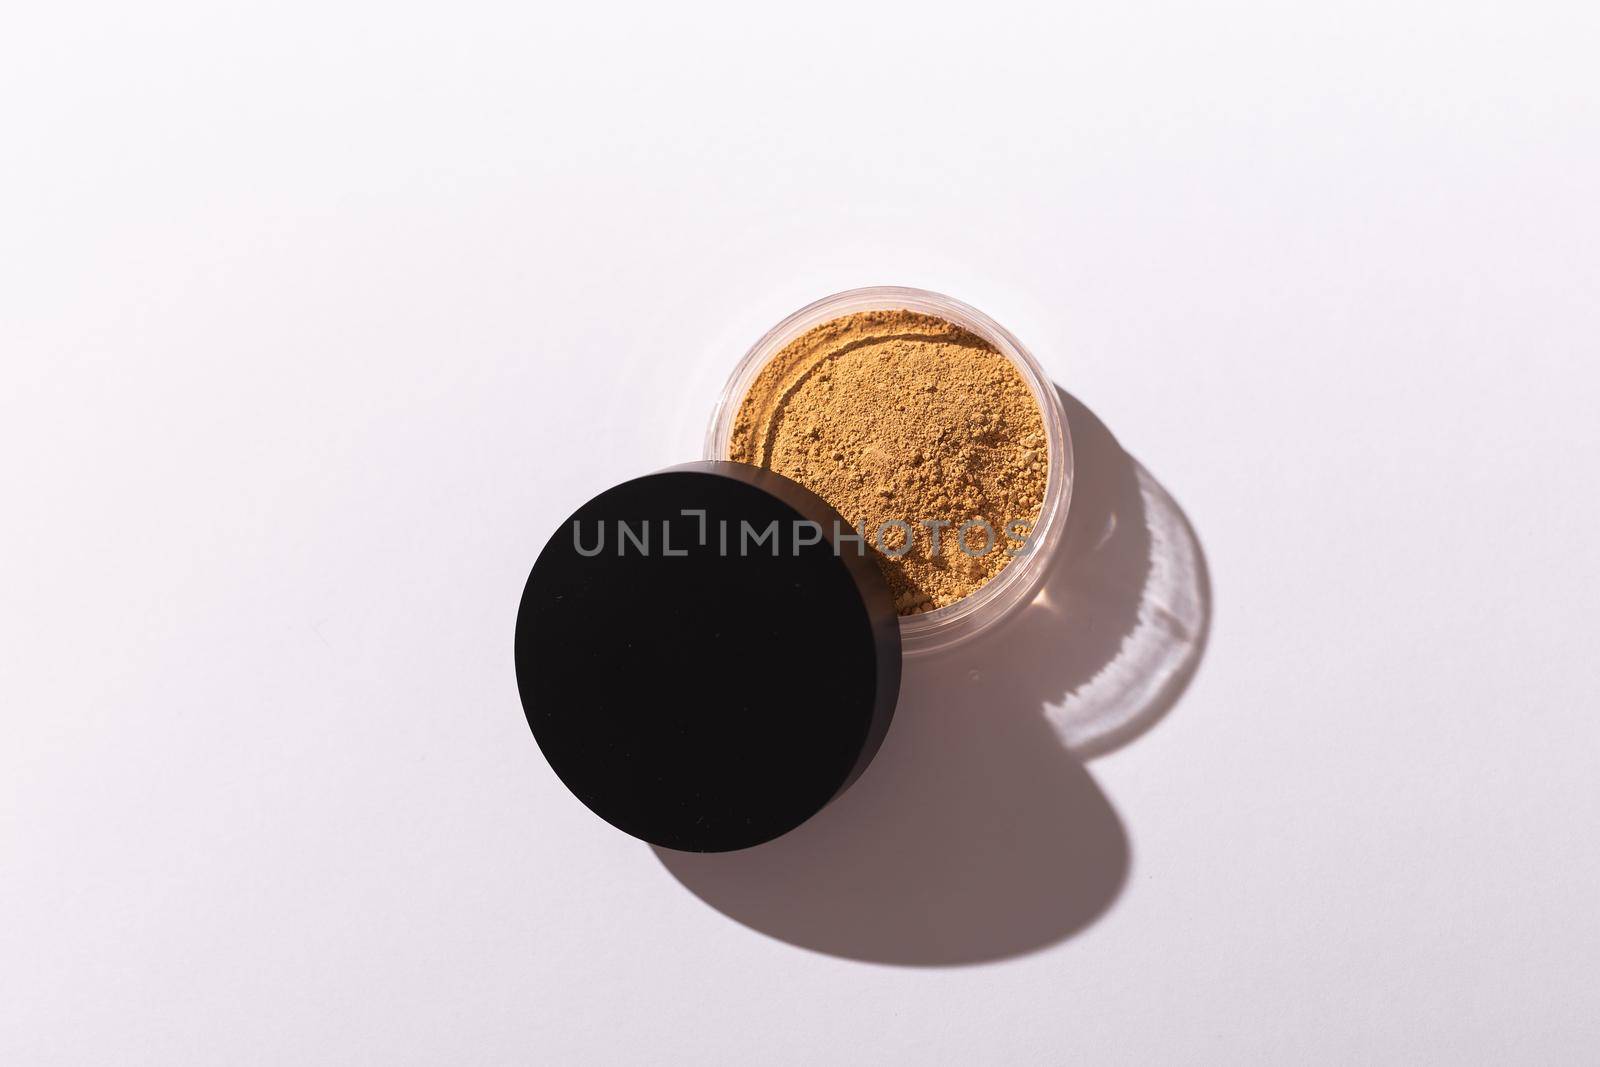 Mineral powder foundation isolated on a white background. Eco-friendly and organic beauty products by Satura86